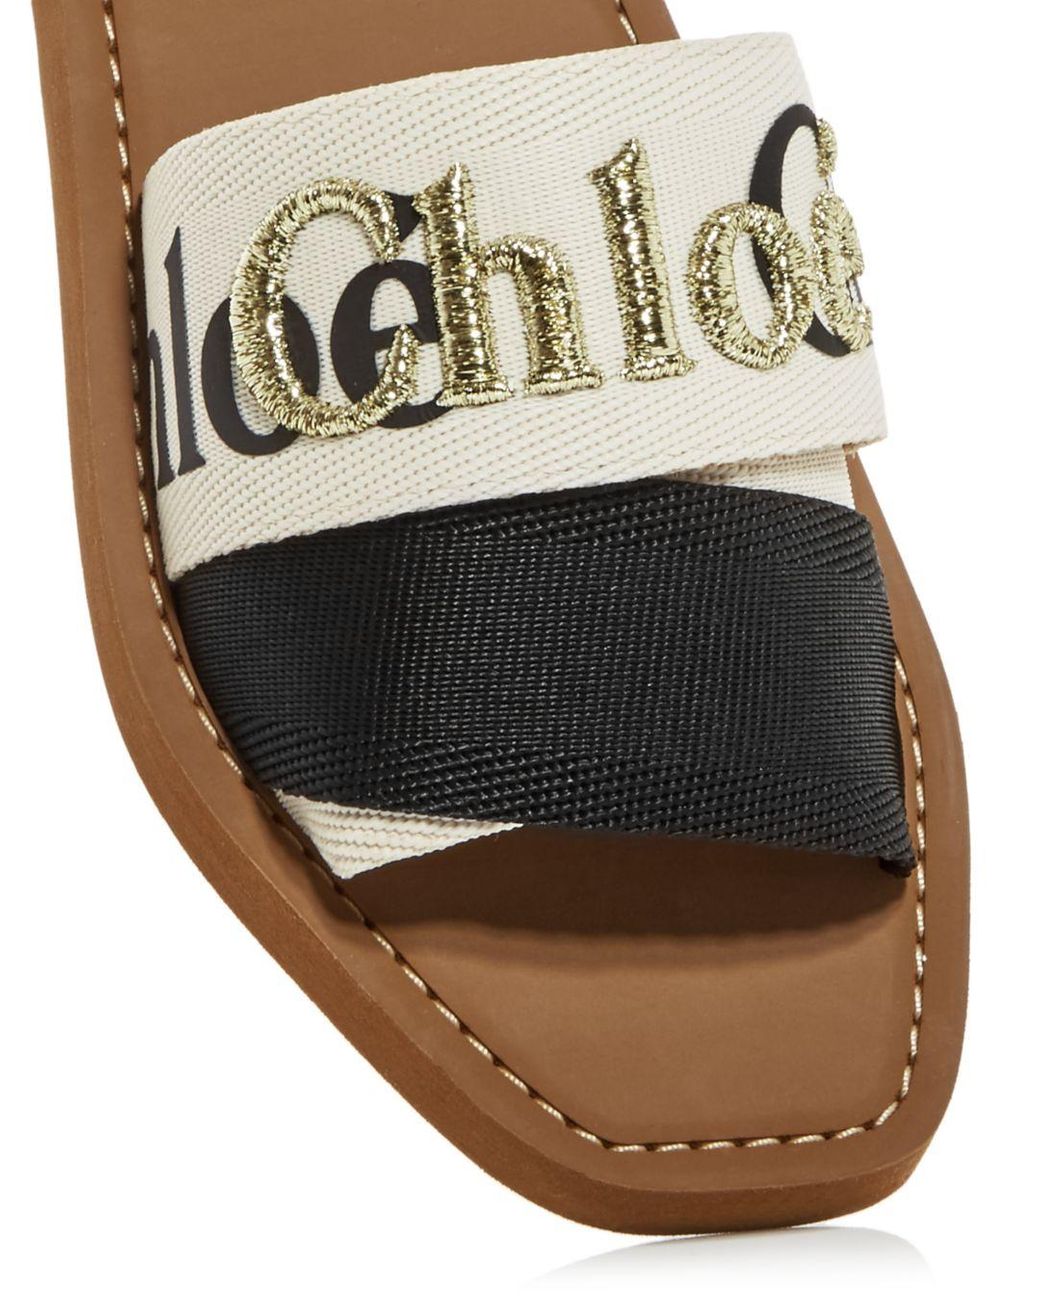 Chloé Lace Woody Embroidered Logo Slide Sandals in Black/White 